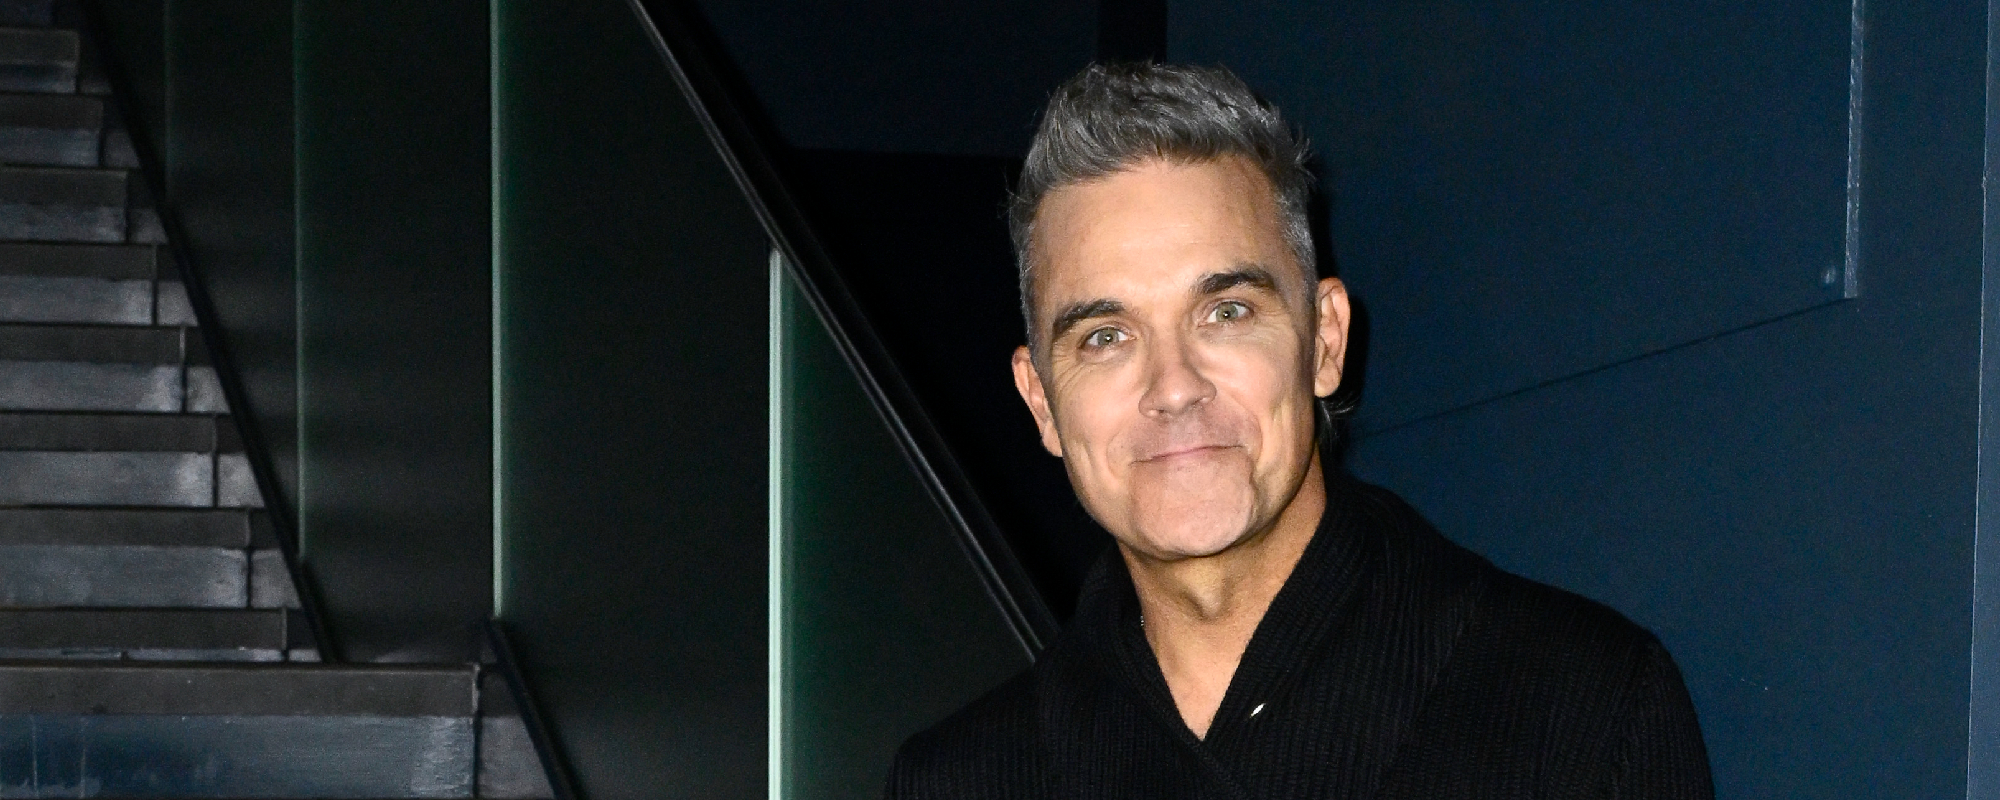 Guy Chambers Reveals How His Head Was About to "Explode" When Recording "Angels" With Robbie Williams